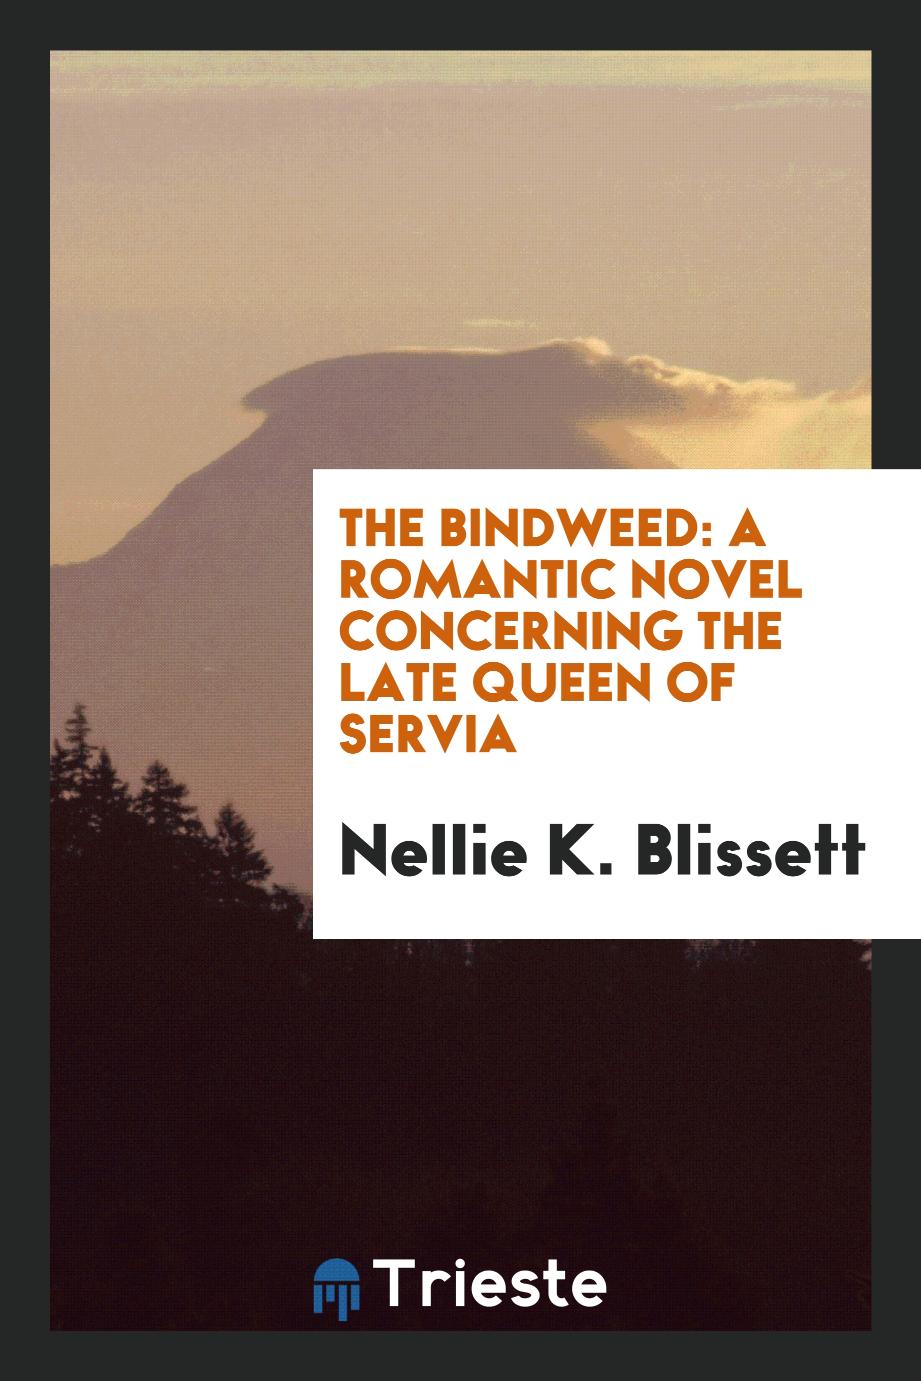 The Bindweed: A Romantic Novel Concerning the Late Queen of Servia